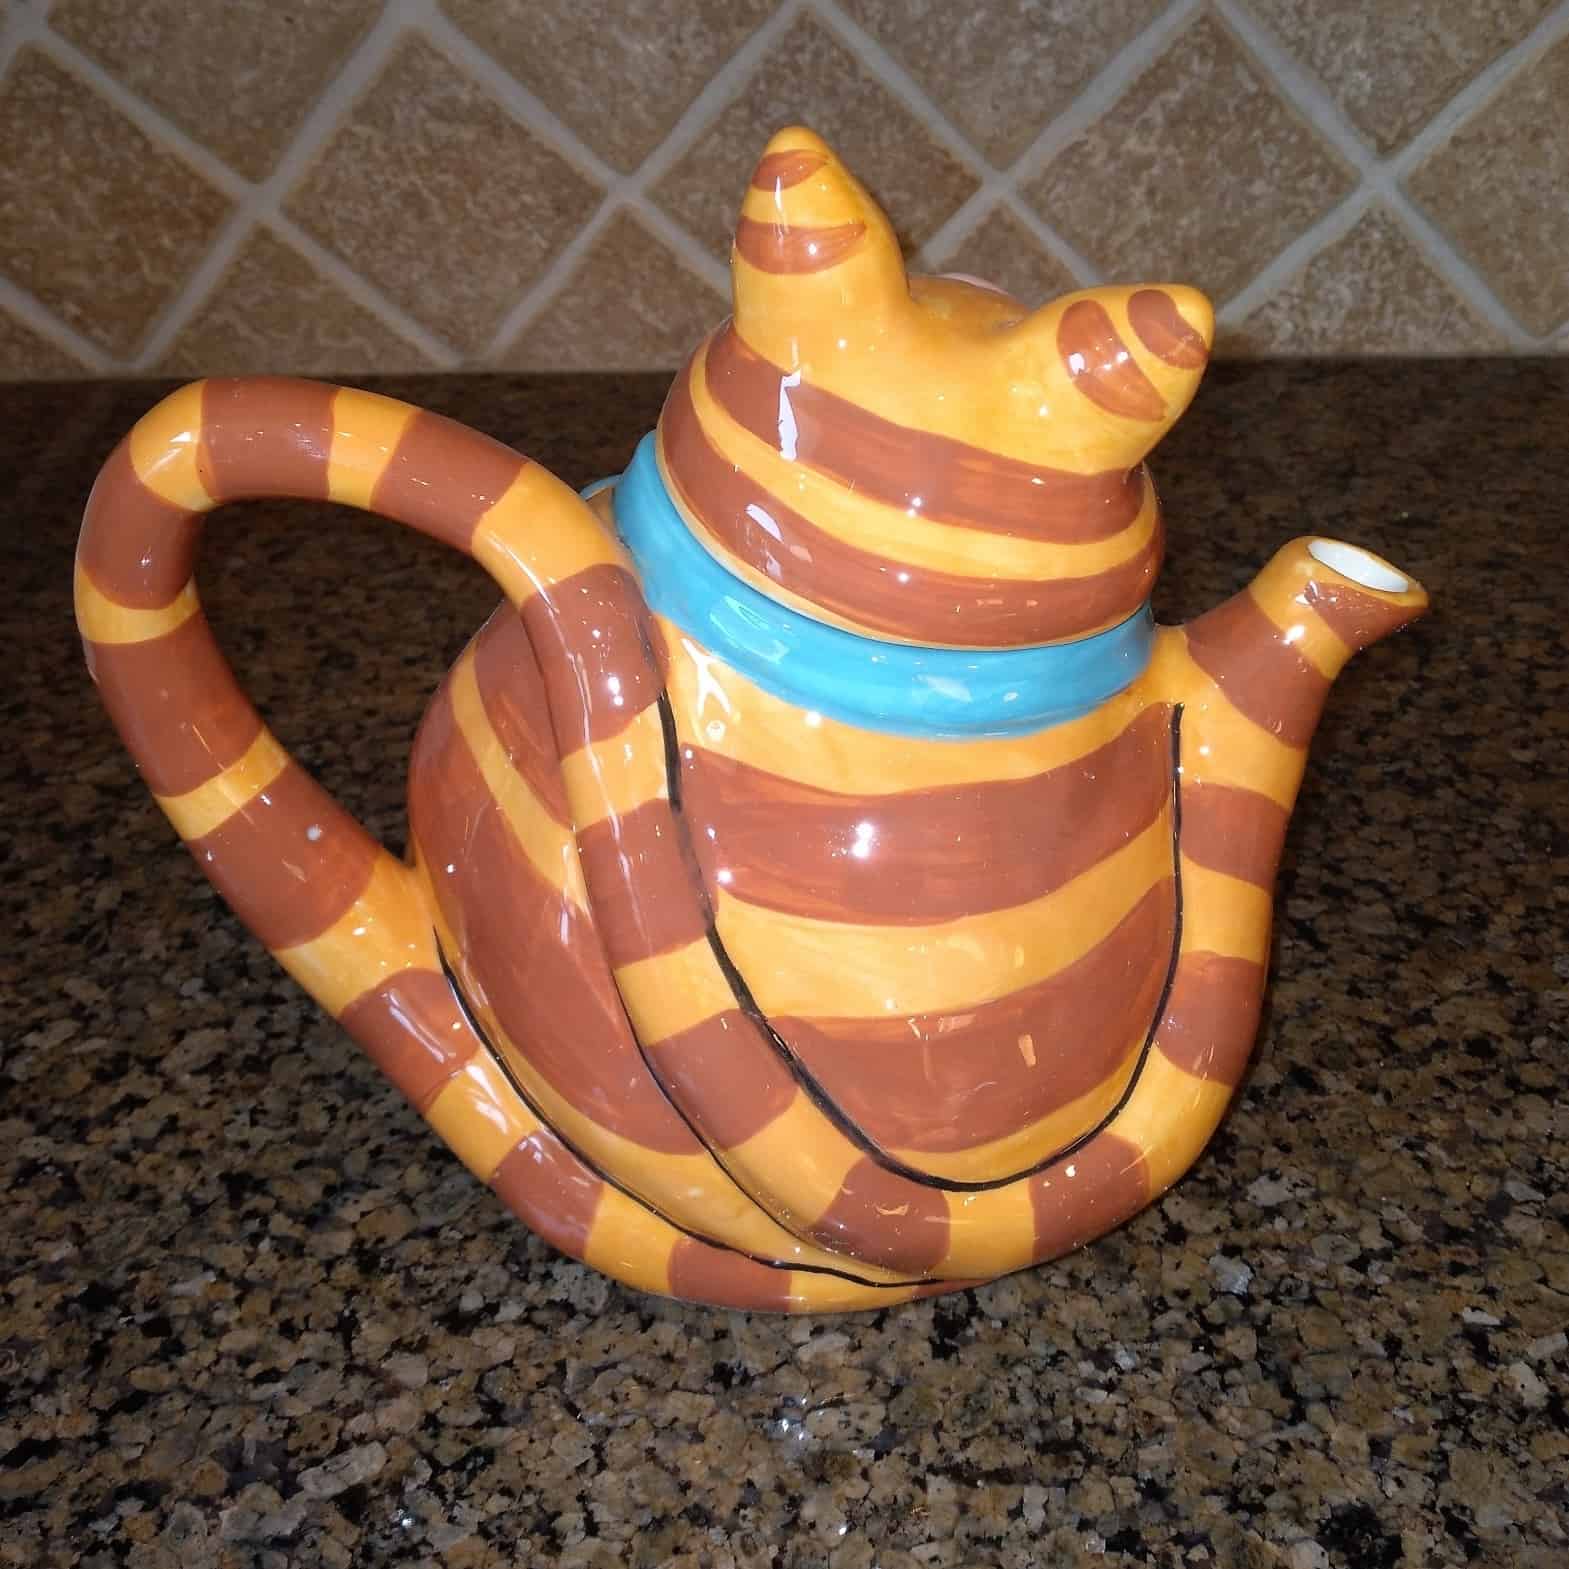 This Orange Cat Ceramic Teapot Decorative Kitchen Decor Blue Sky by Lynda Corneille is made with love by Premier Homegoods! Shop more unique gift ideas today with Spots Initiatives, the best way to support creators.